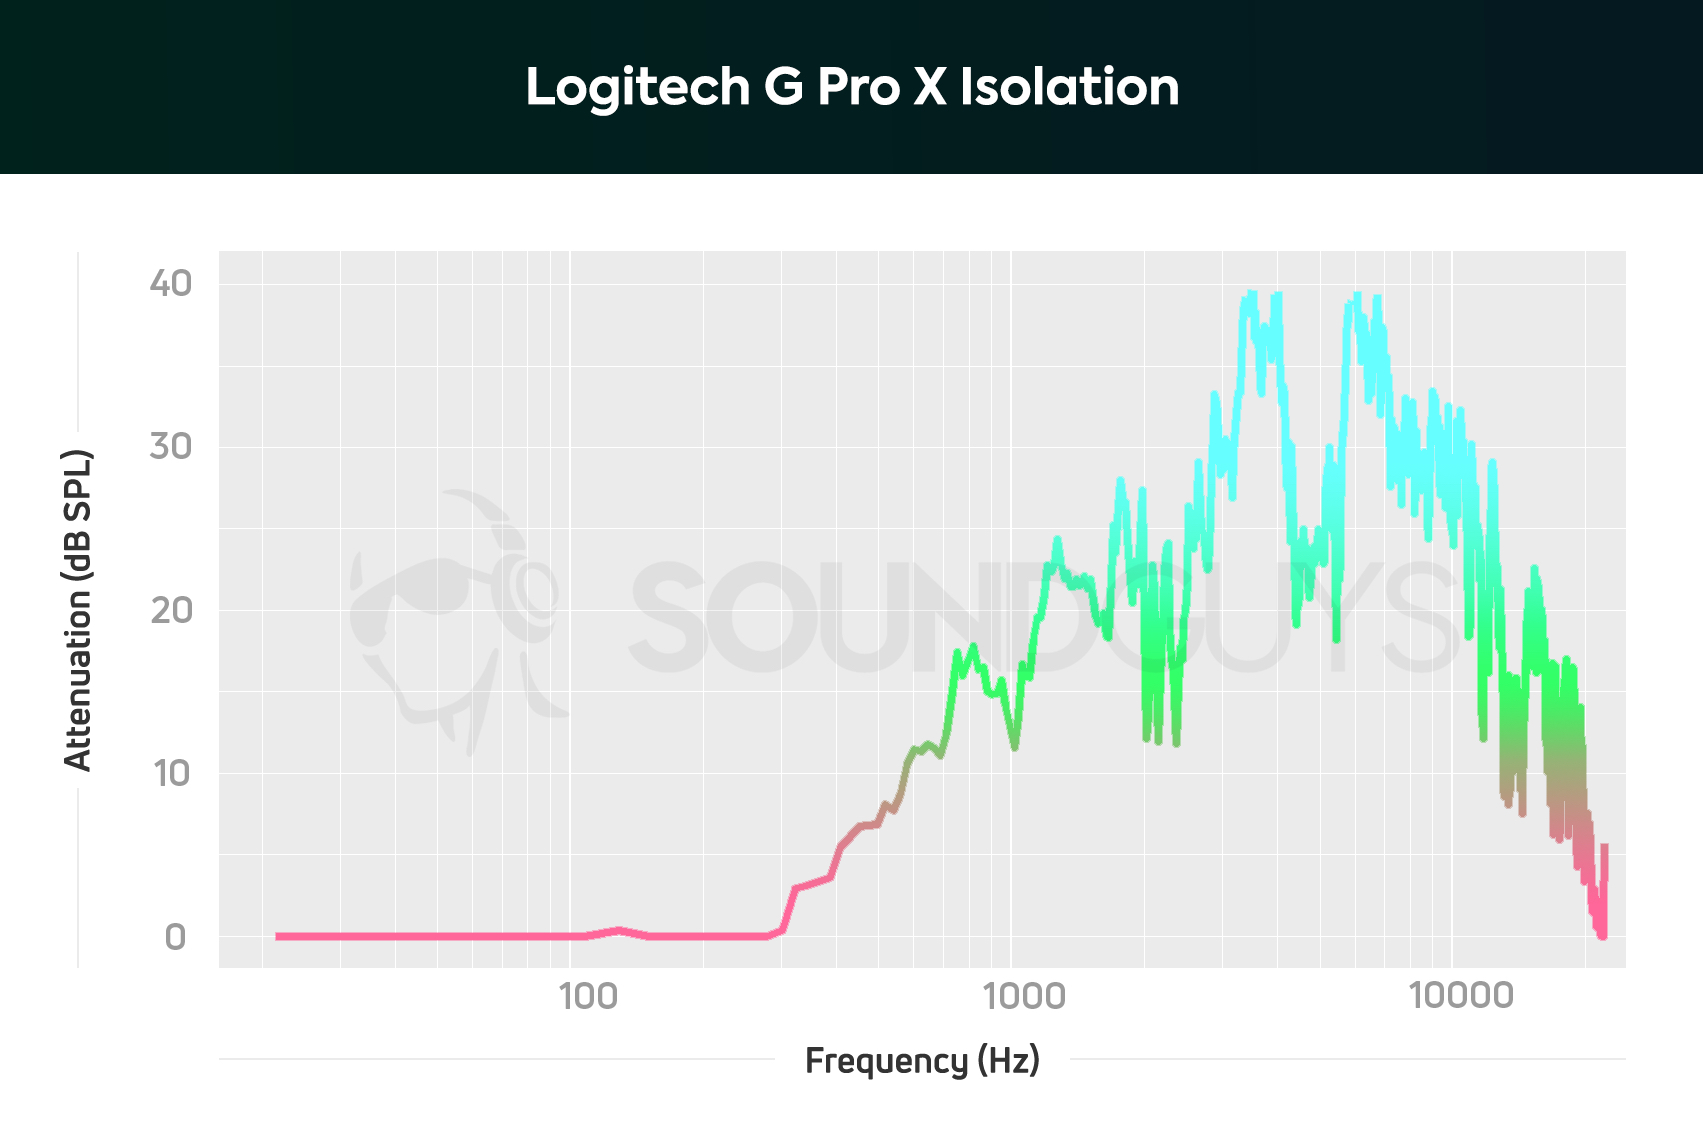 An isolation chart for the Logitech G Pro X gaming headset.